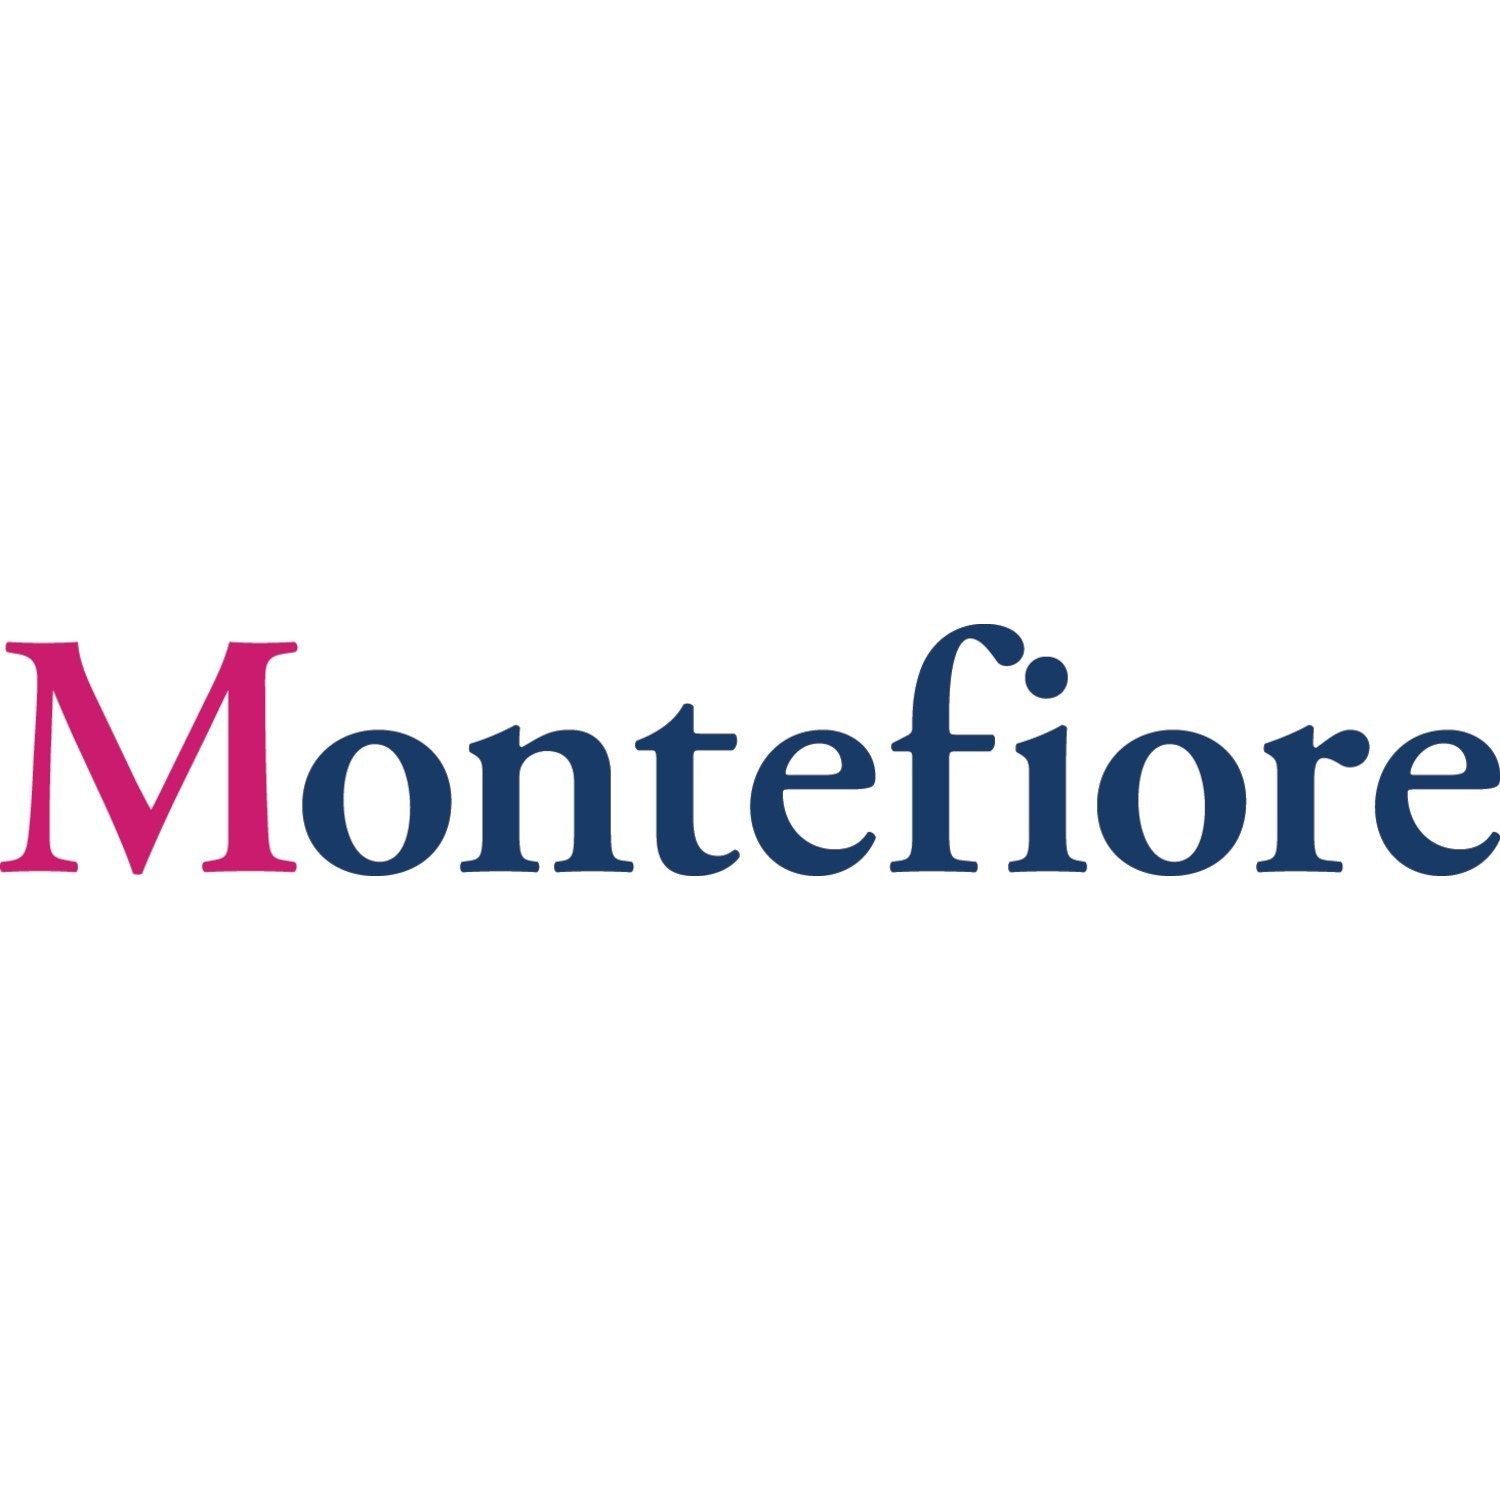 What is the revenue of Montefiore?